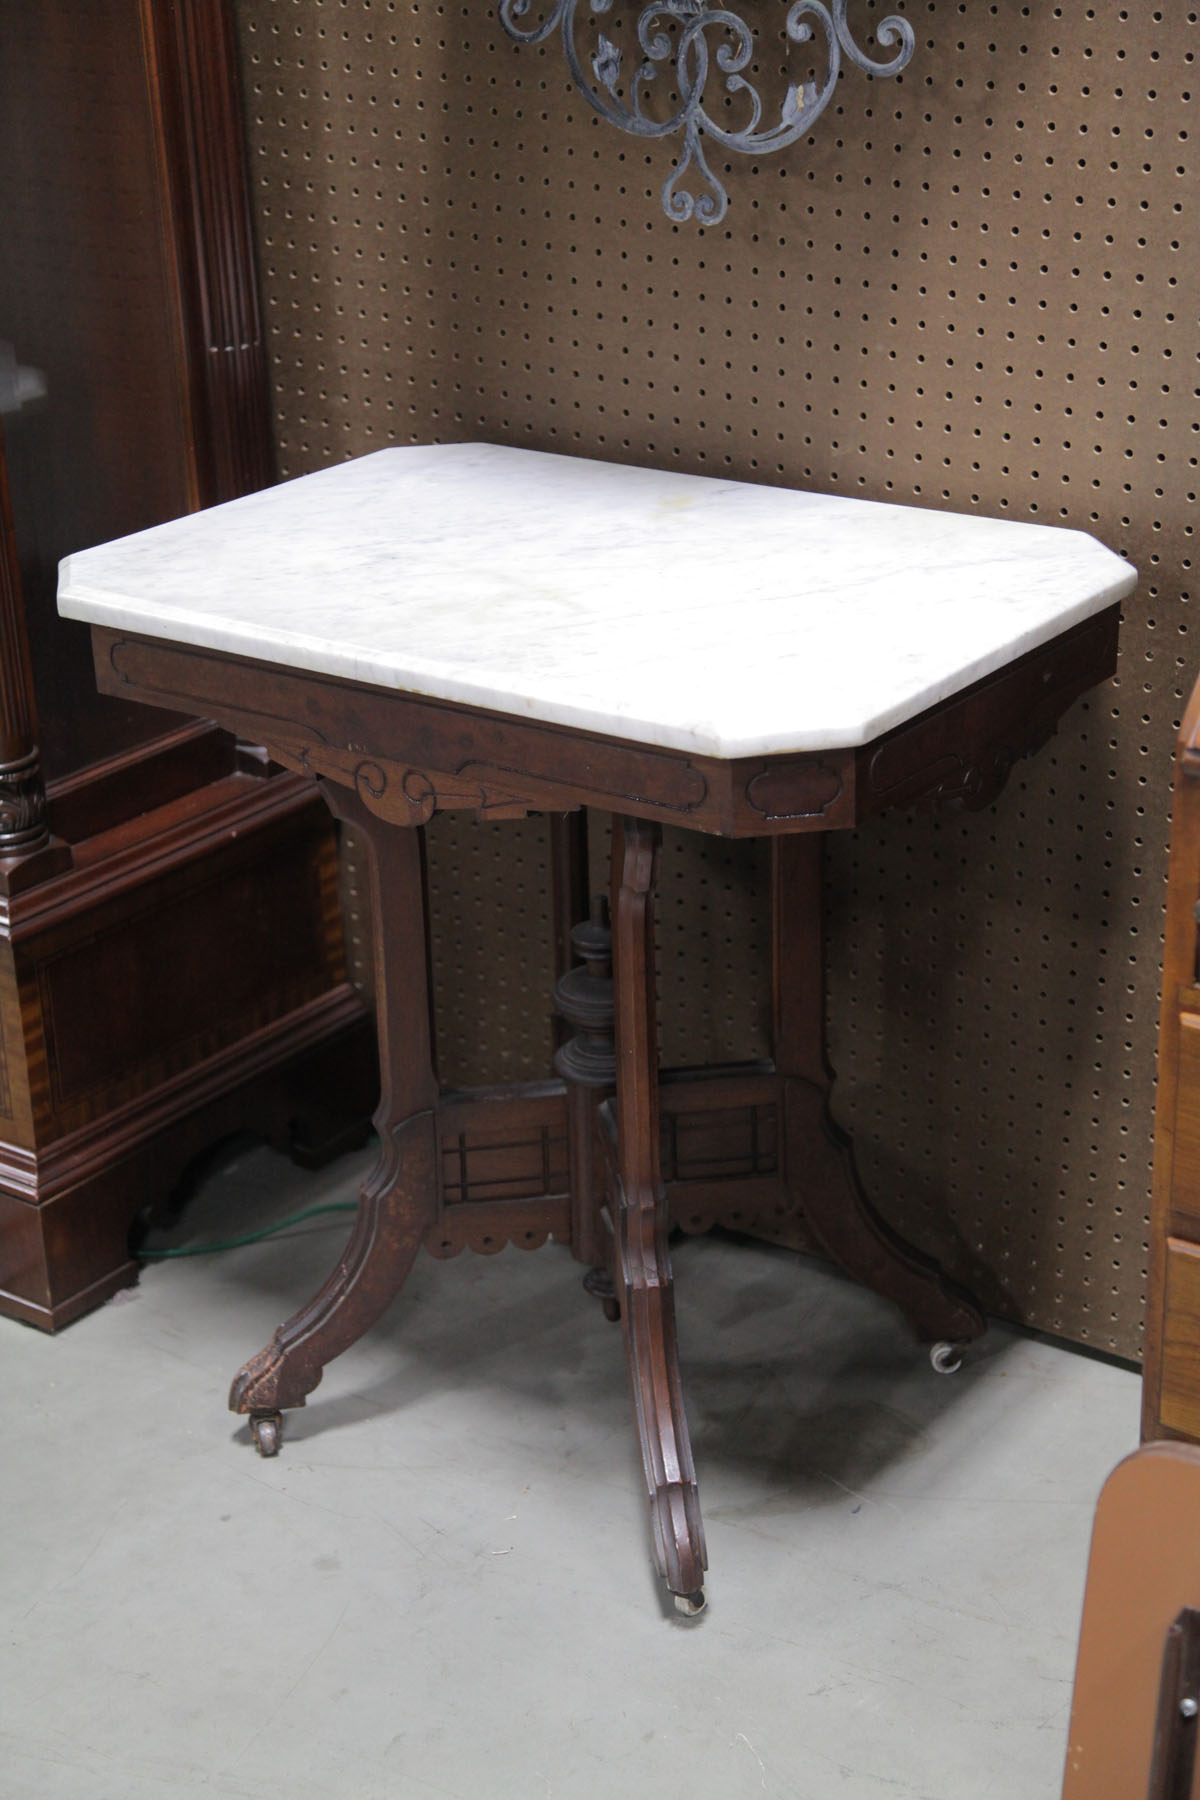 VICTORIAN PARLOR STAND.  American  late